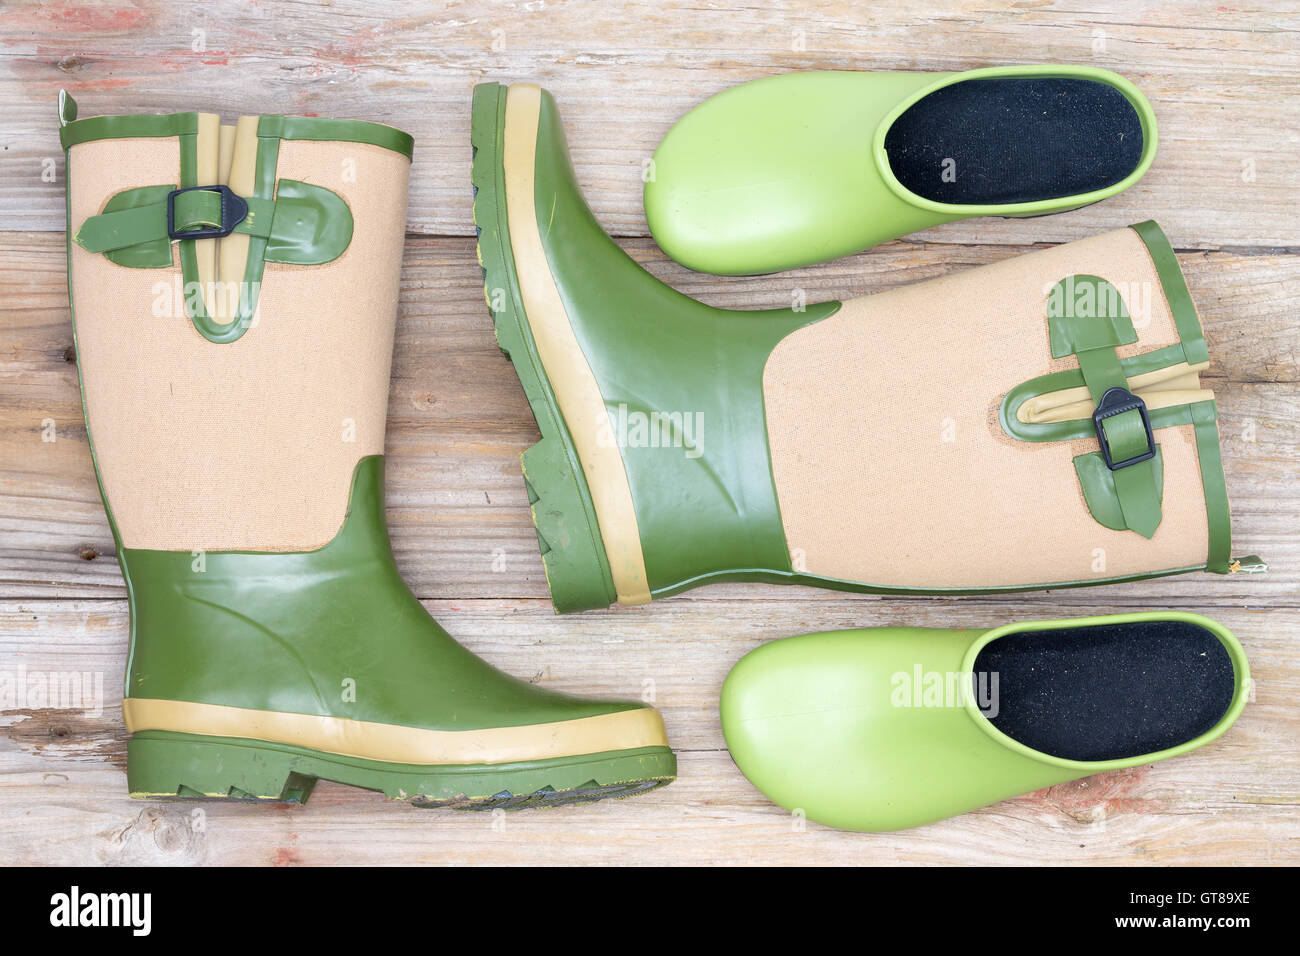 Stylish footwear for a fashionable gardener with green and beige decorative gumboots and green clogs lying on rustic wooden boar Stock Photo